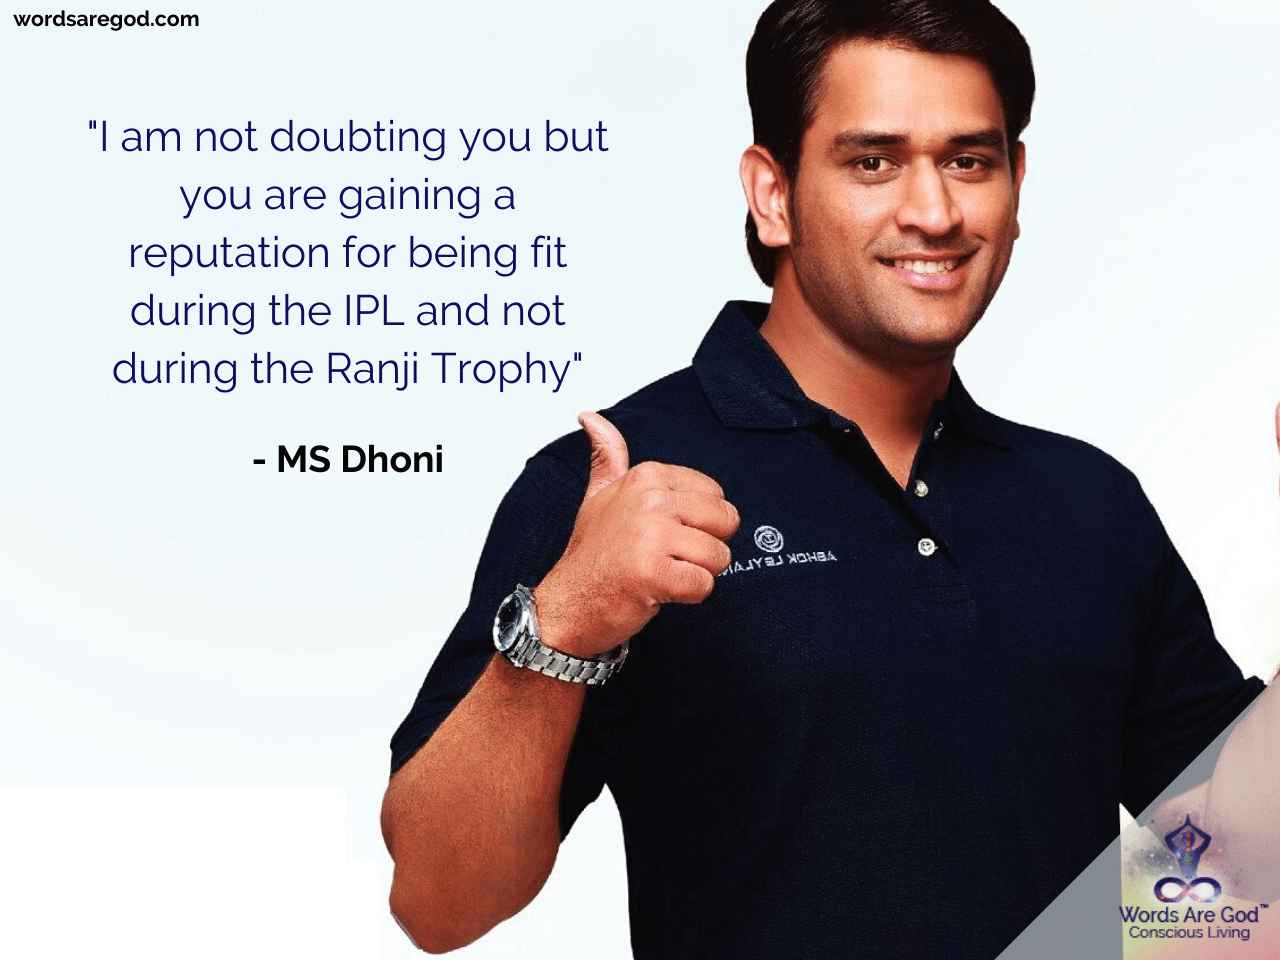 MS Dhoni quotes. life quotes about love. life quotes love. inspirational quotes life. inspirational quotes image